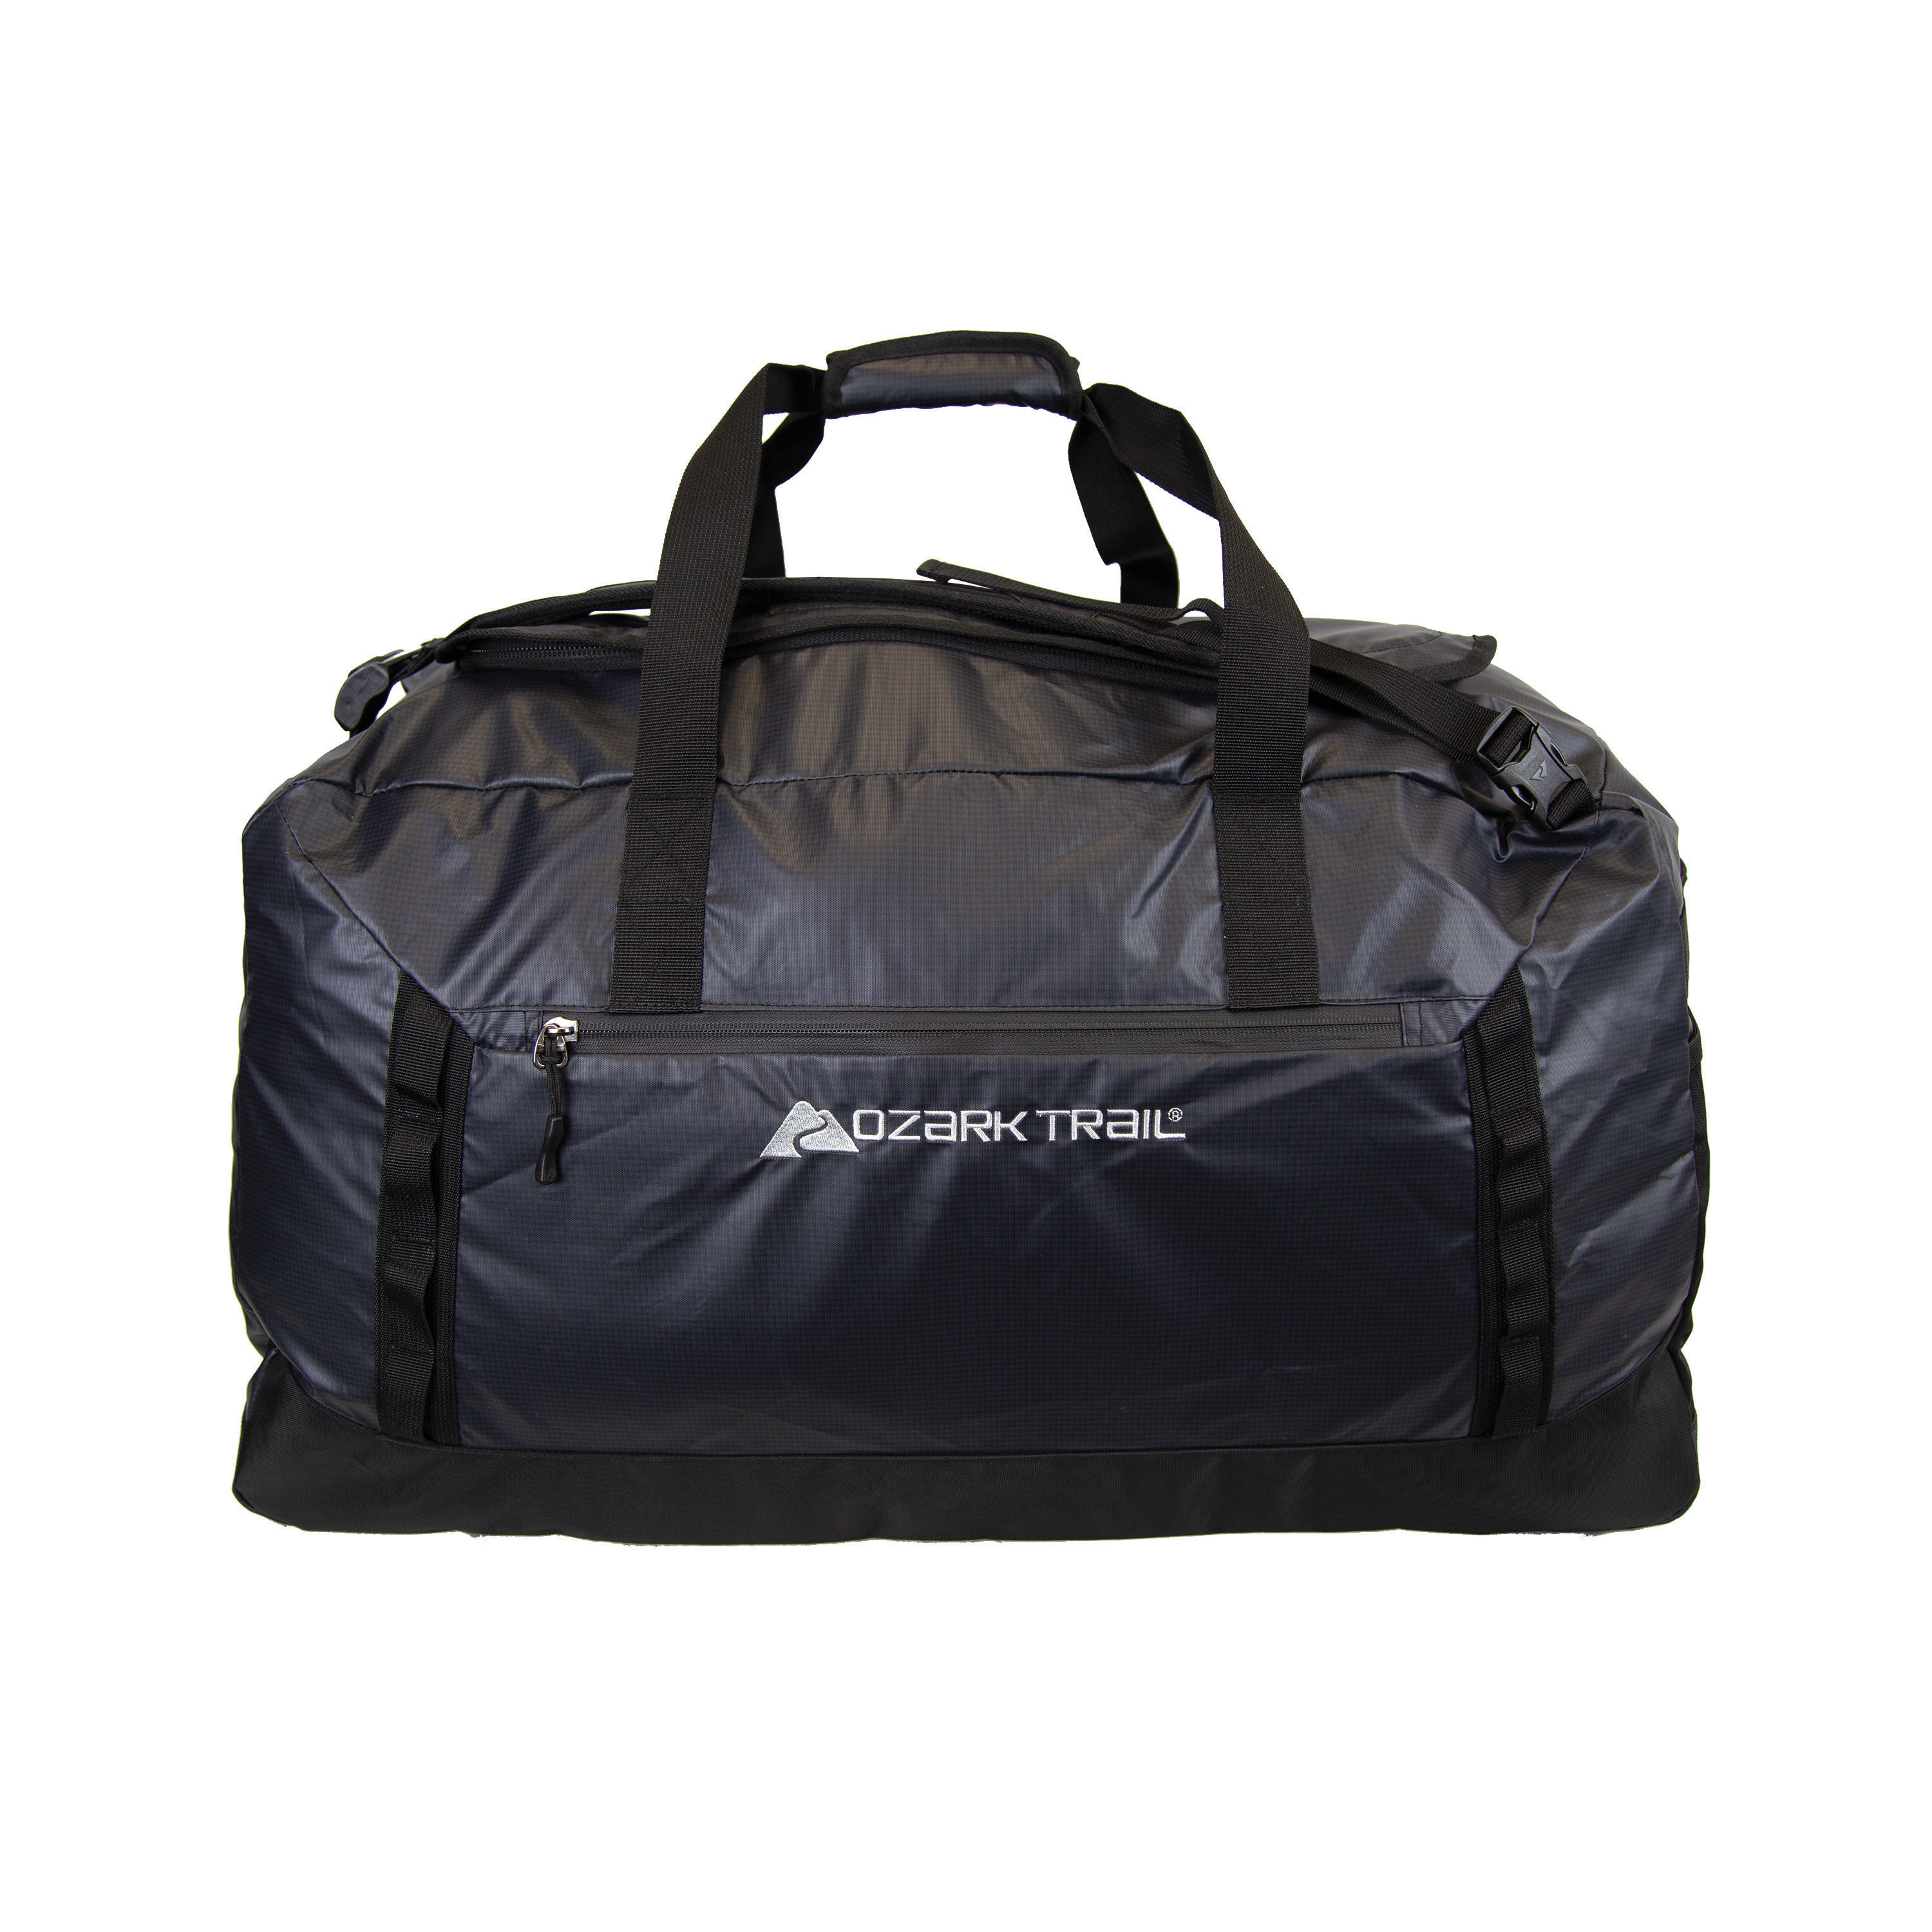 Ozark Trail 90L Packable All-Weather Duffel Bag with Convertible ...